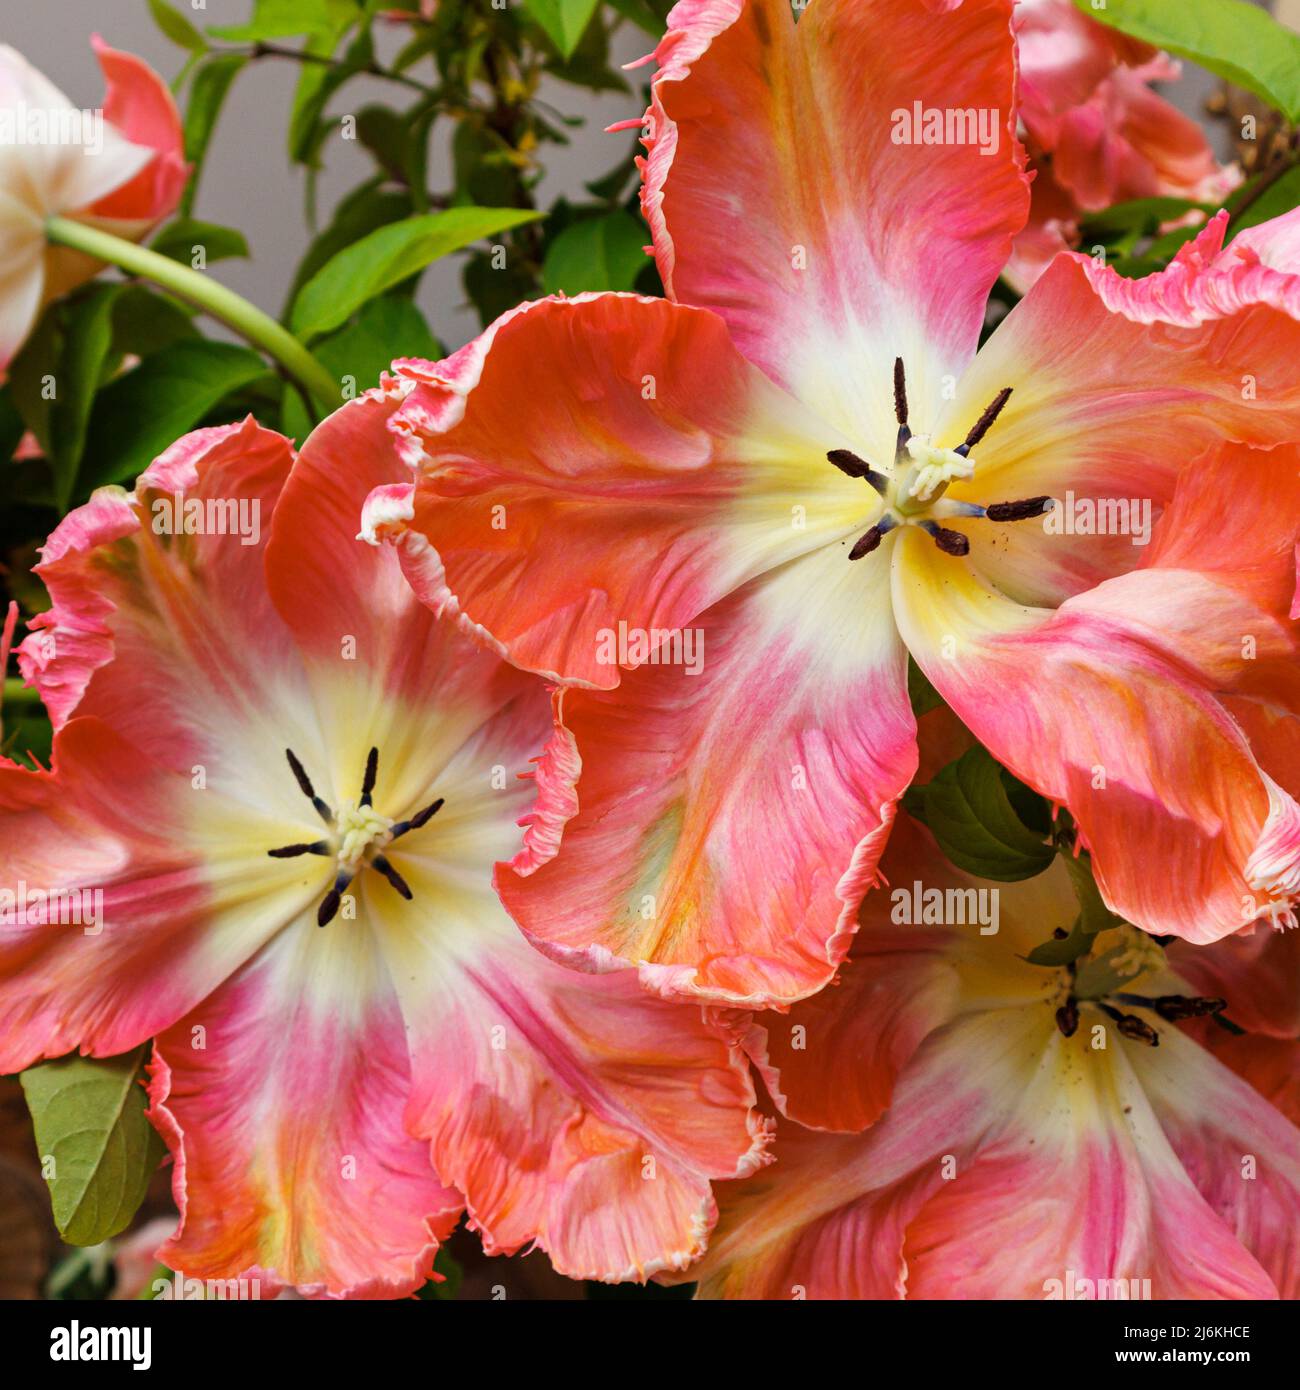 Irregular shaped frilly edged petals of large multi-coloured Apricot Parrot tulips in bloom in late spring, grown in a garden in Surrey, SE England Stock Photo